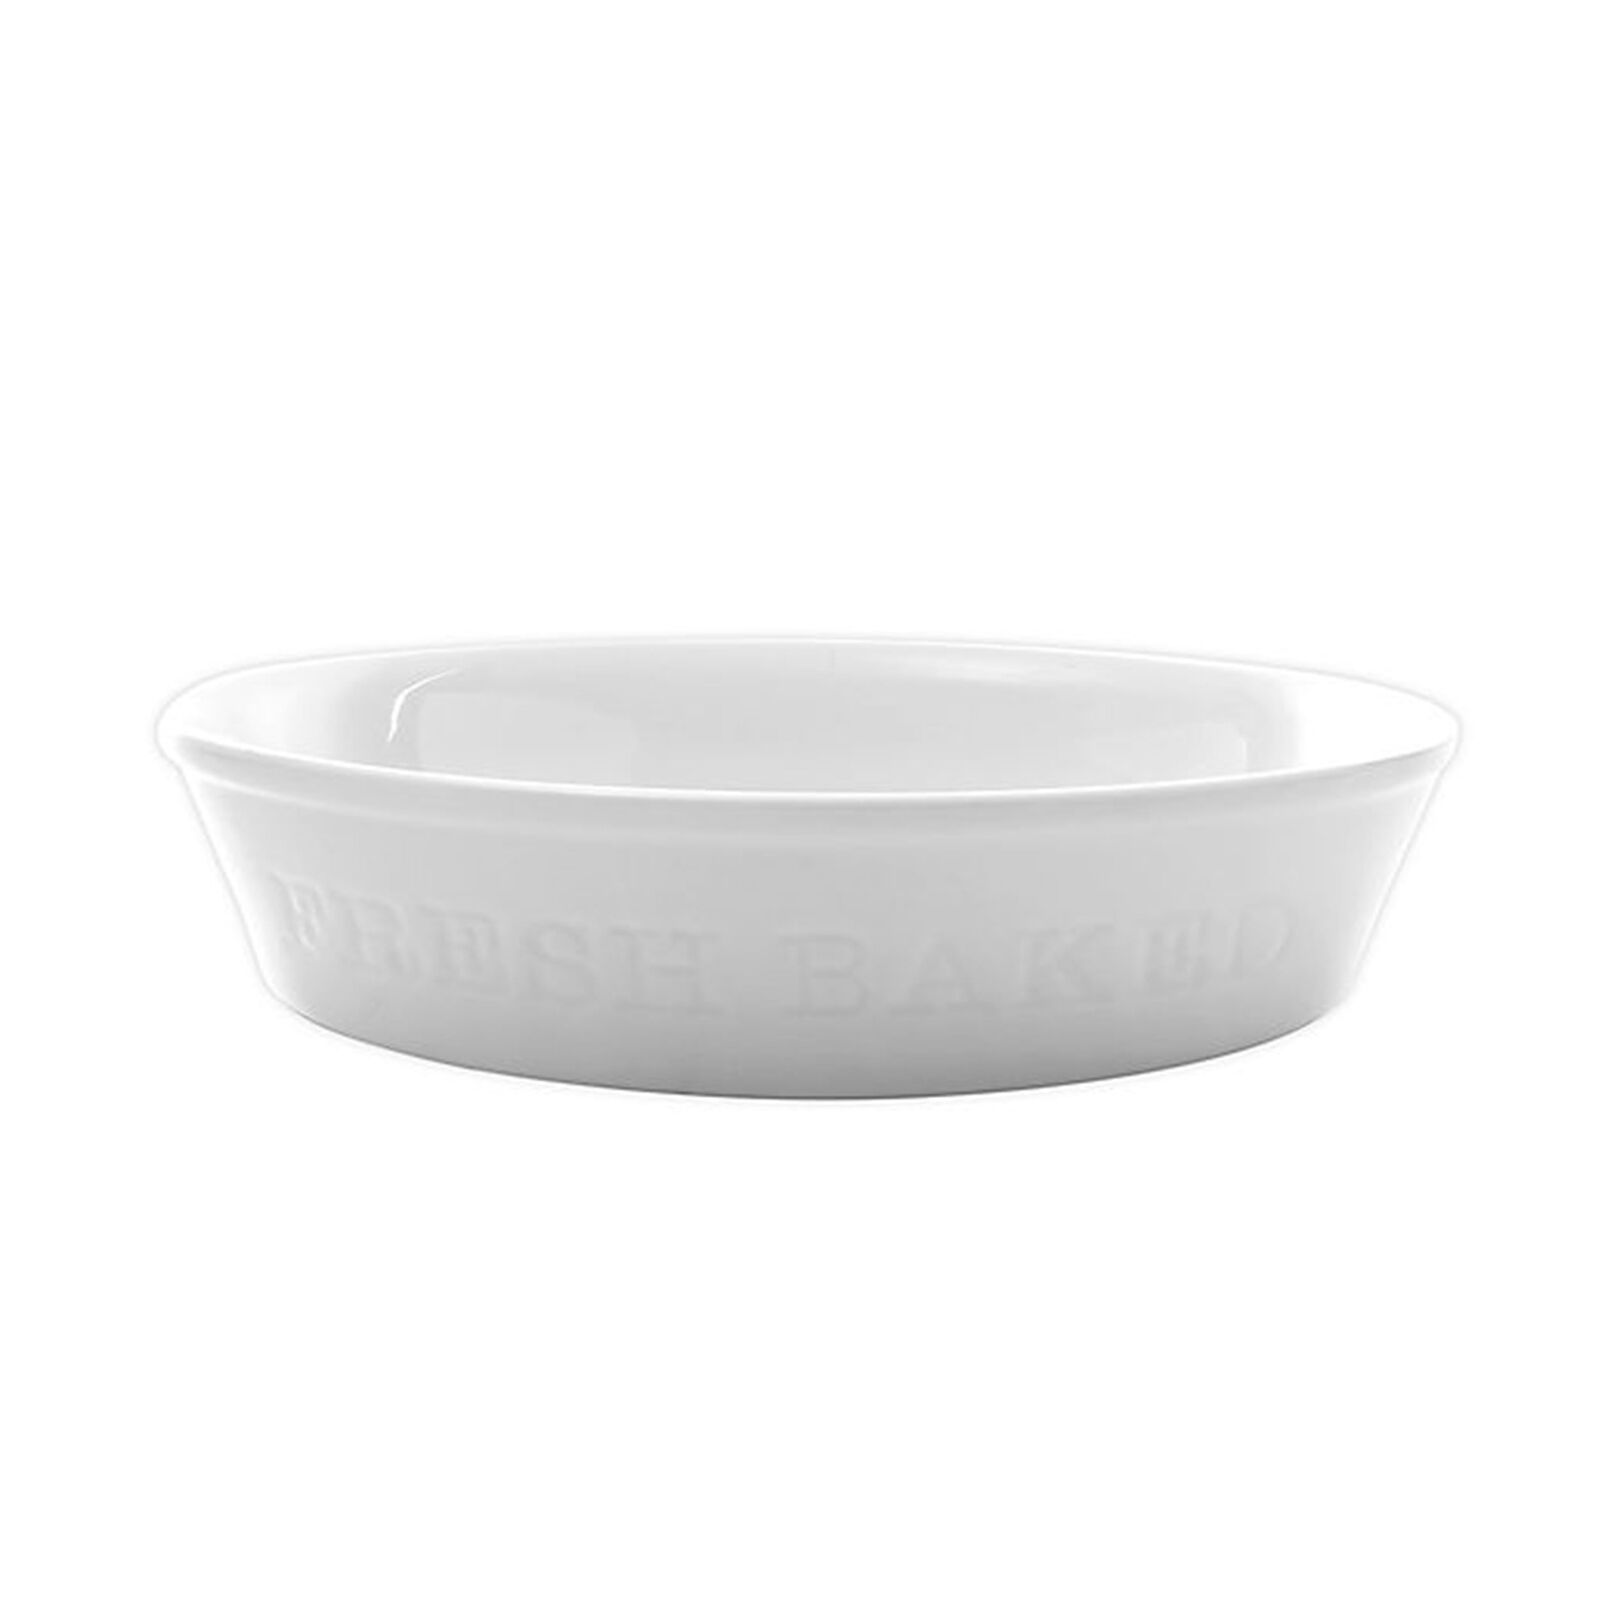 Simply White 9.5 Inch Round Porcelain Fresh Baked Pie Plate